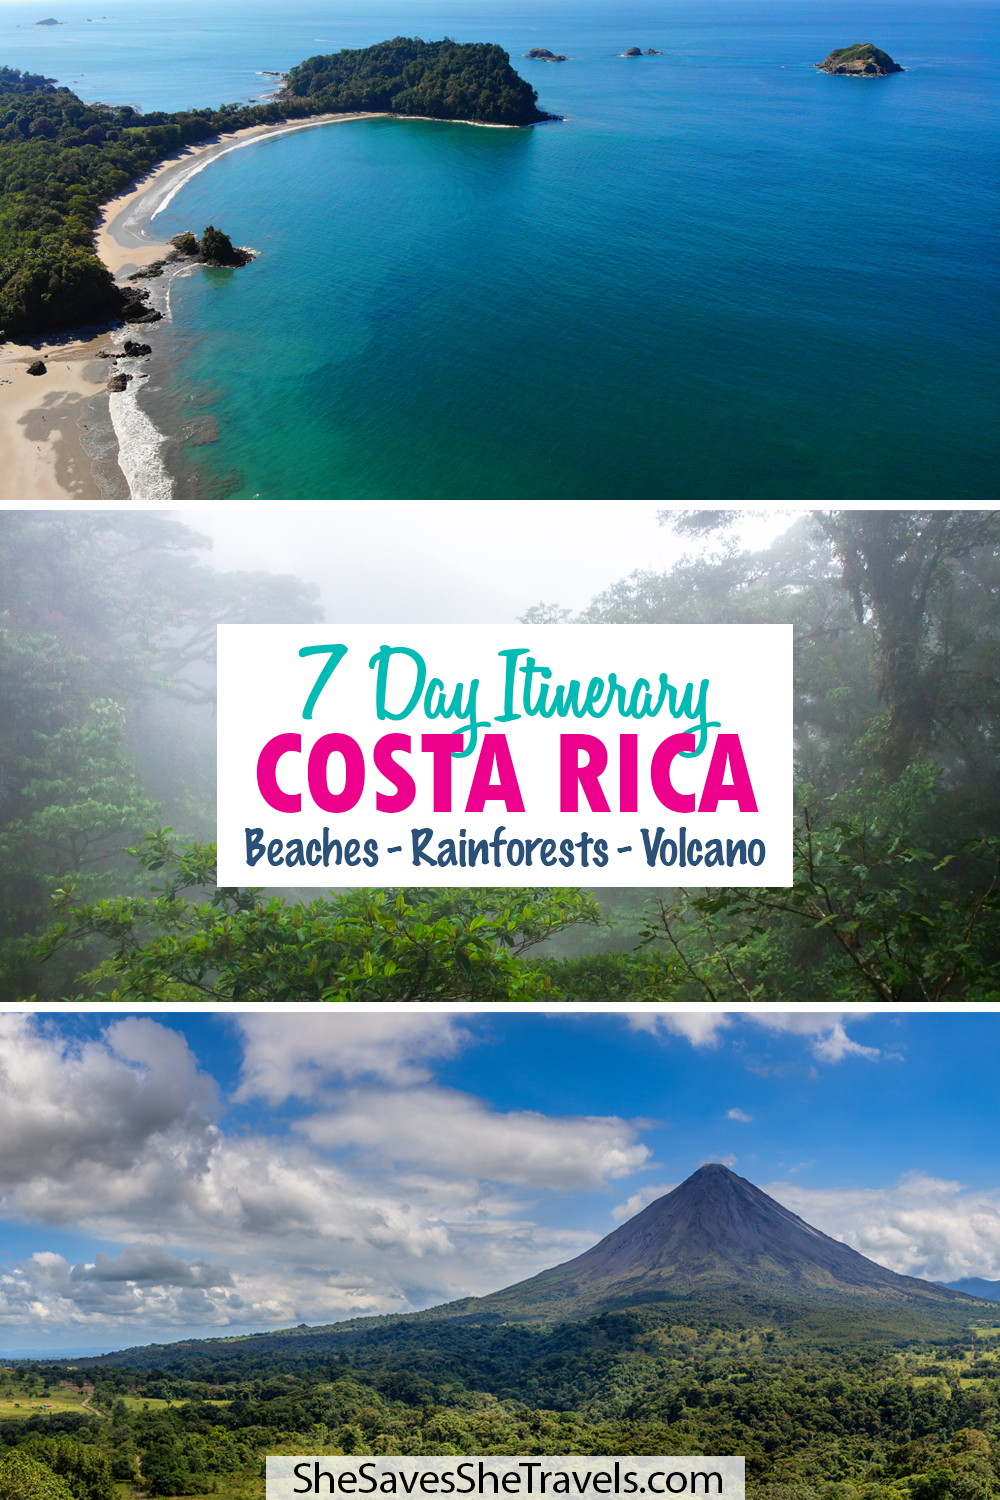 7 day itinerary Costa Rica beaches-rainforests-volcano with view of beach and blue water cloud forest and volcano